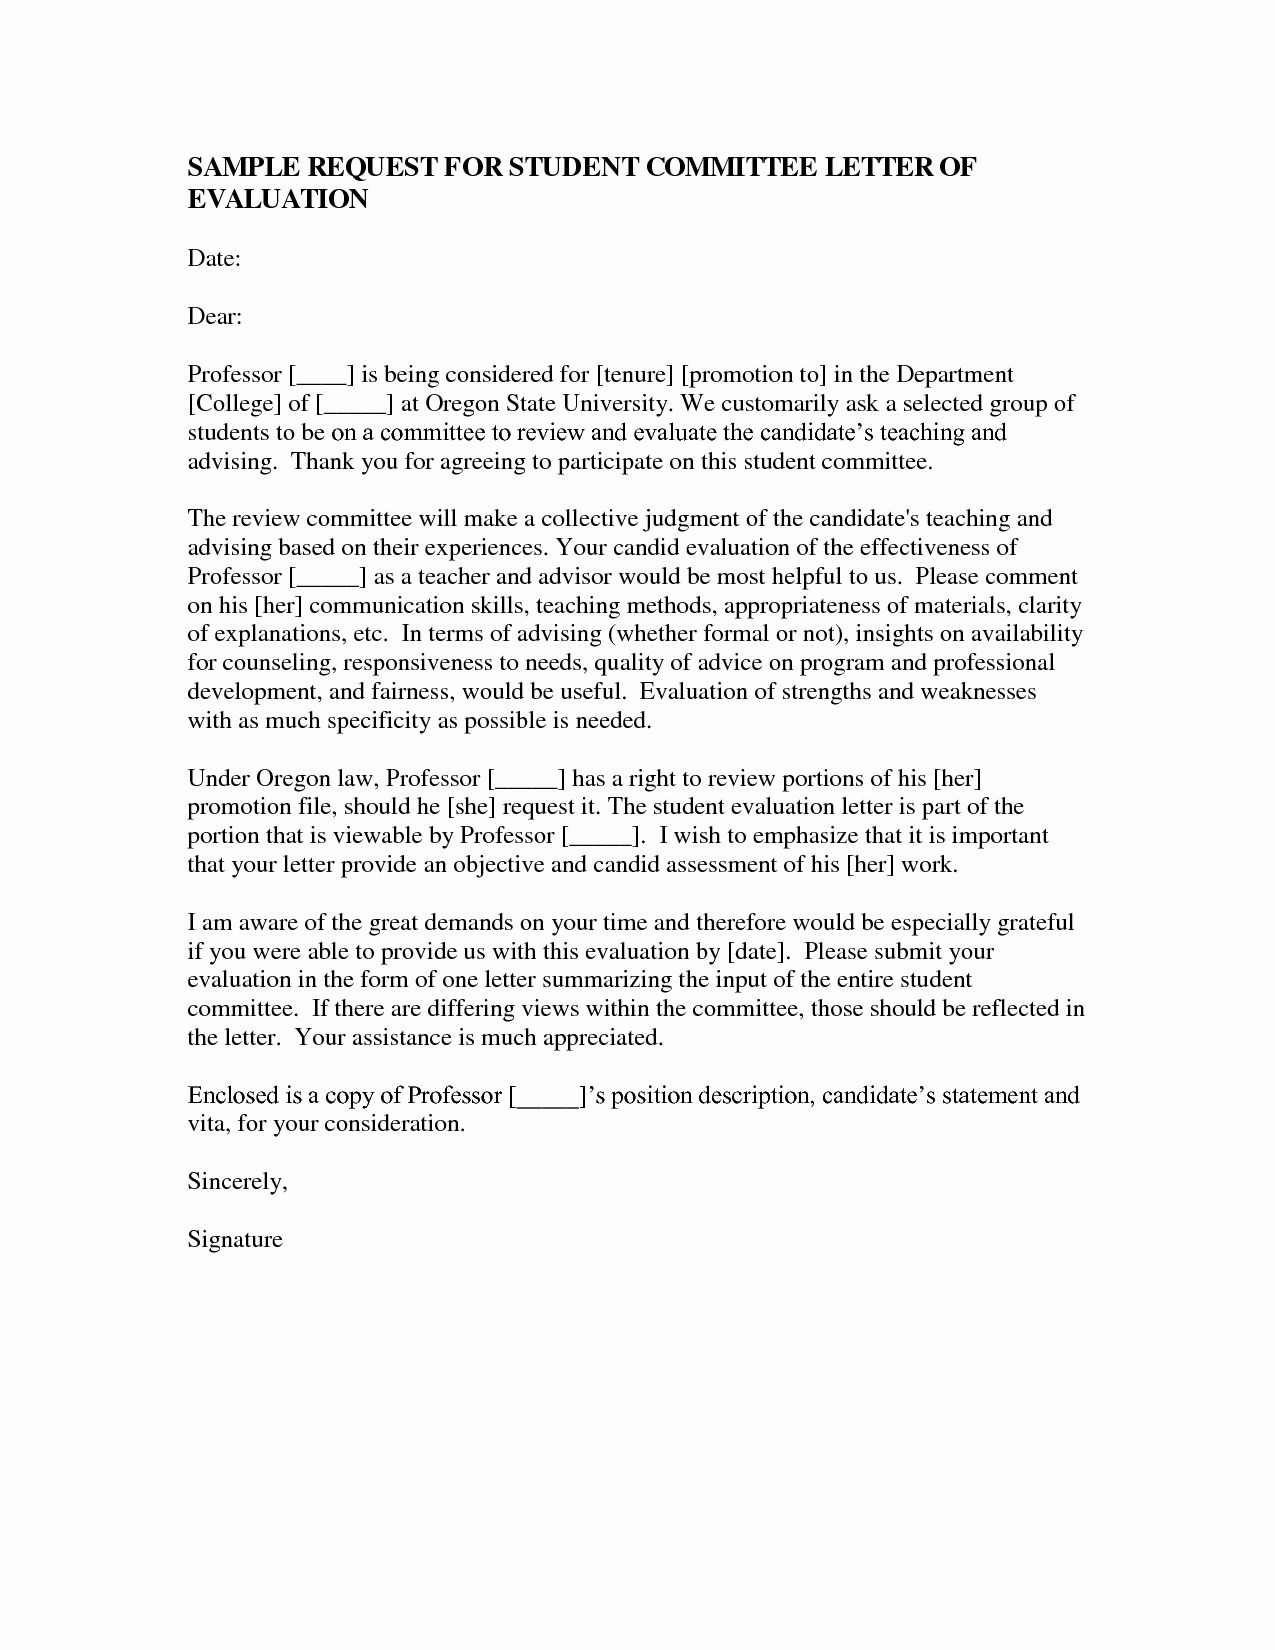 30 Recommendation Letter For Professor Promotion In 2020 within size 1275 X 1650